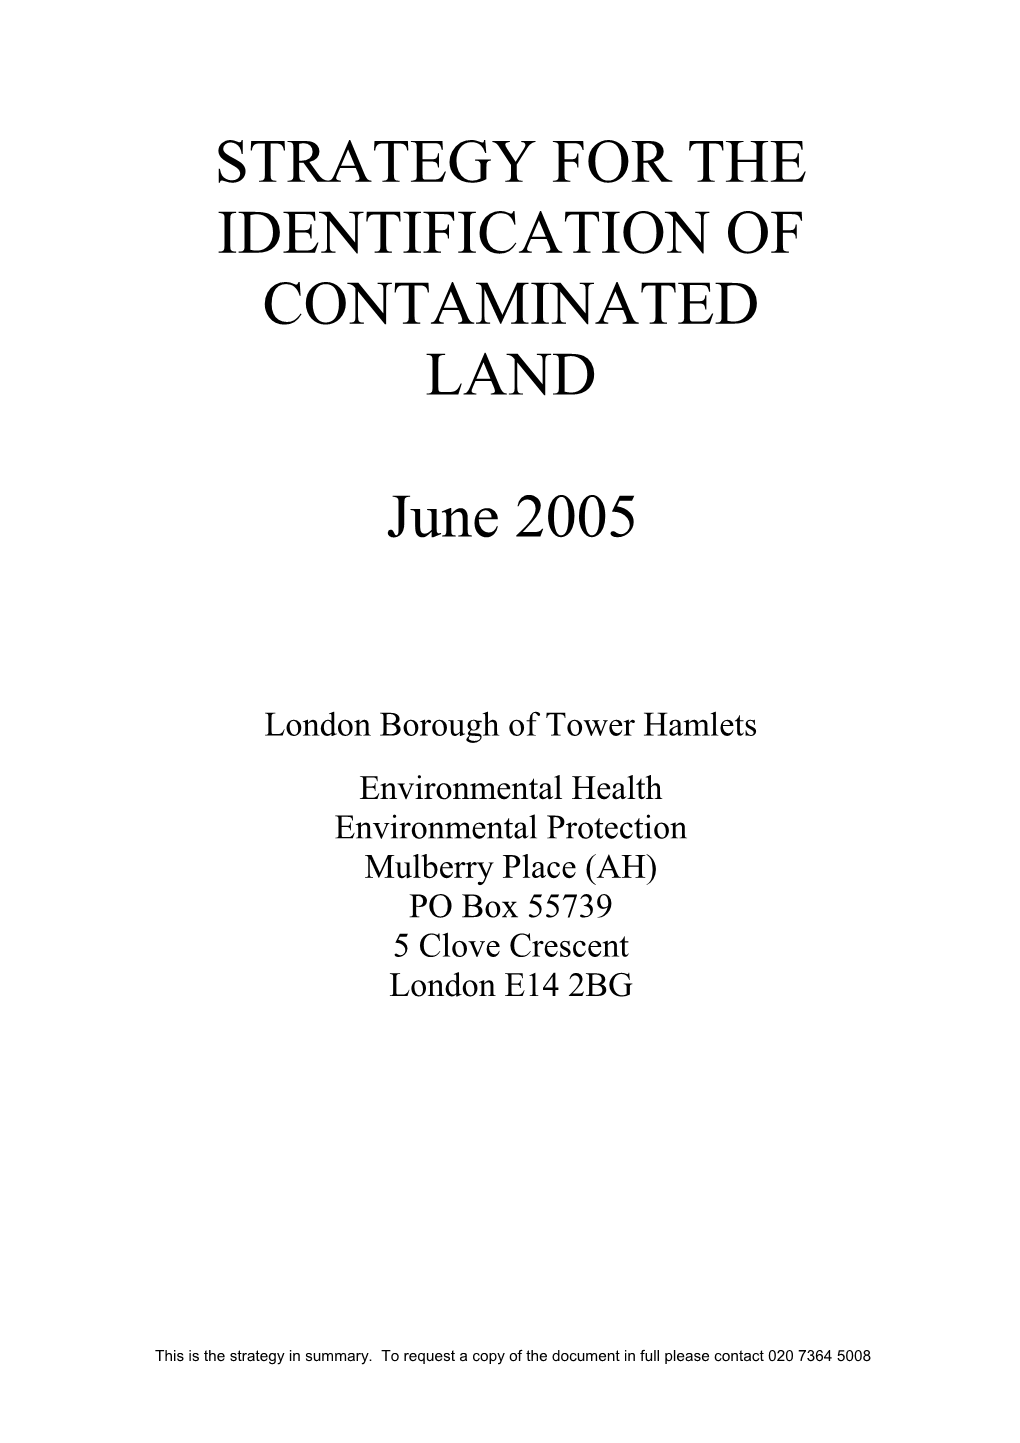 Strategy for the Identification of Contaminated Land